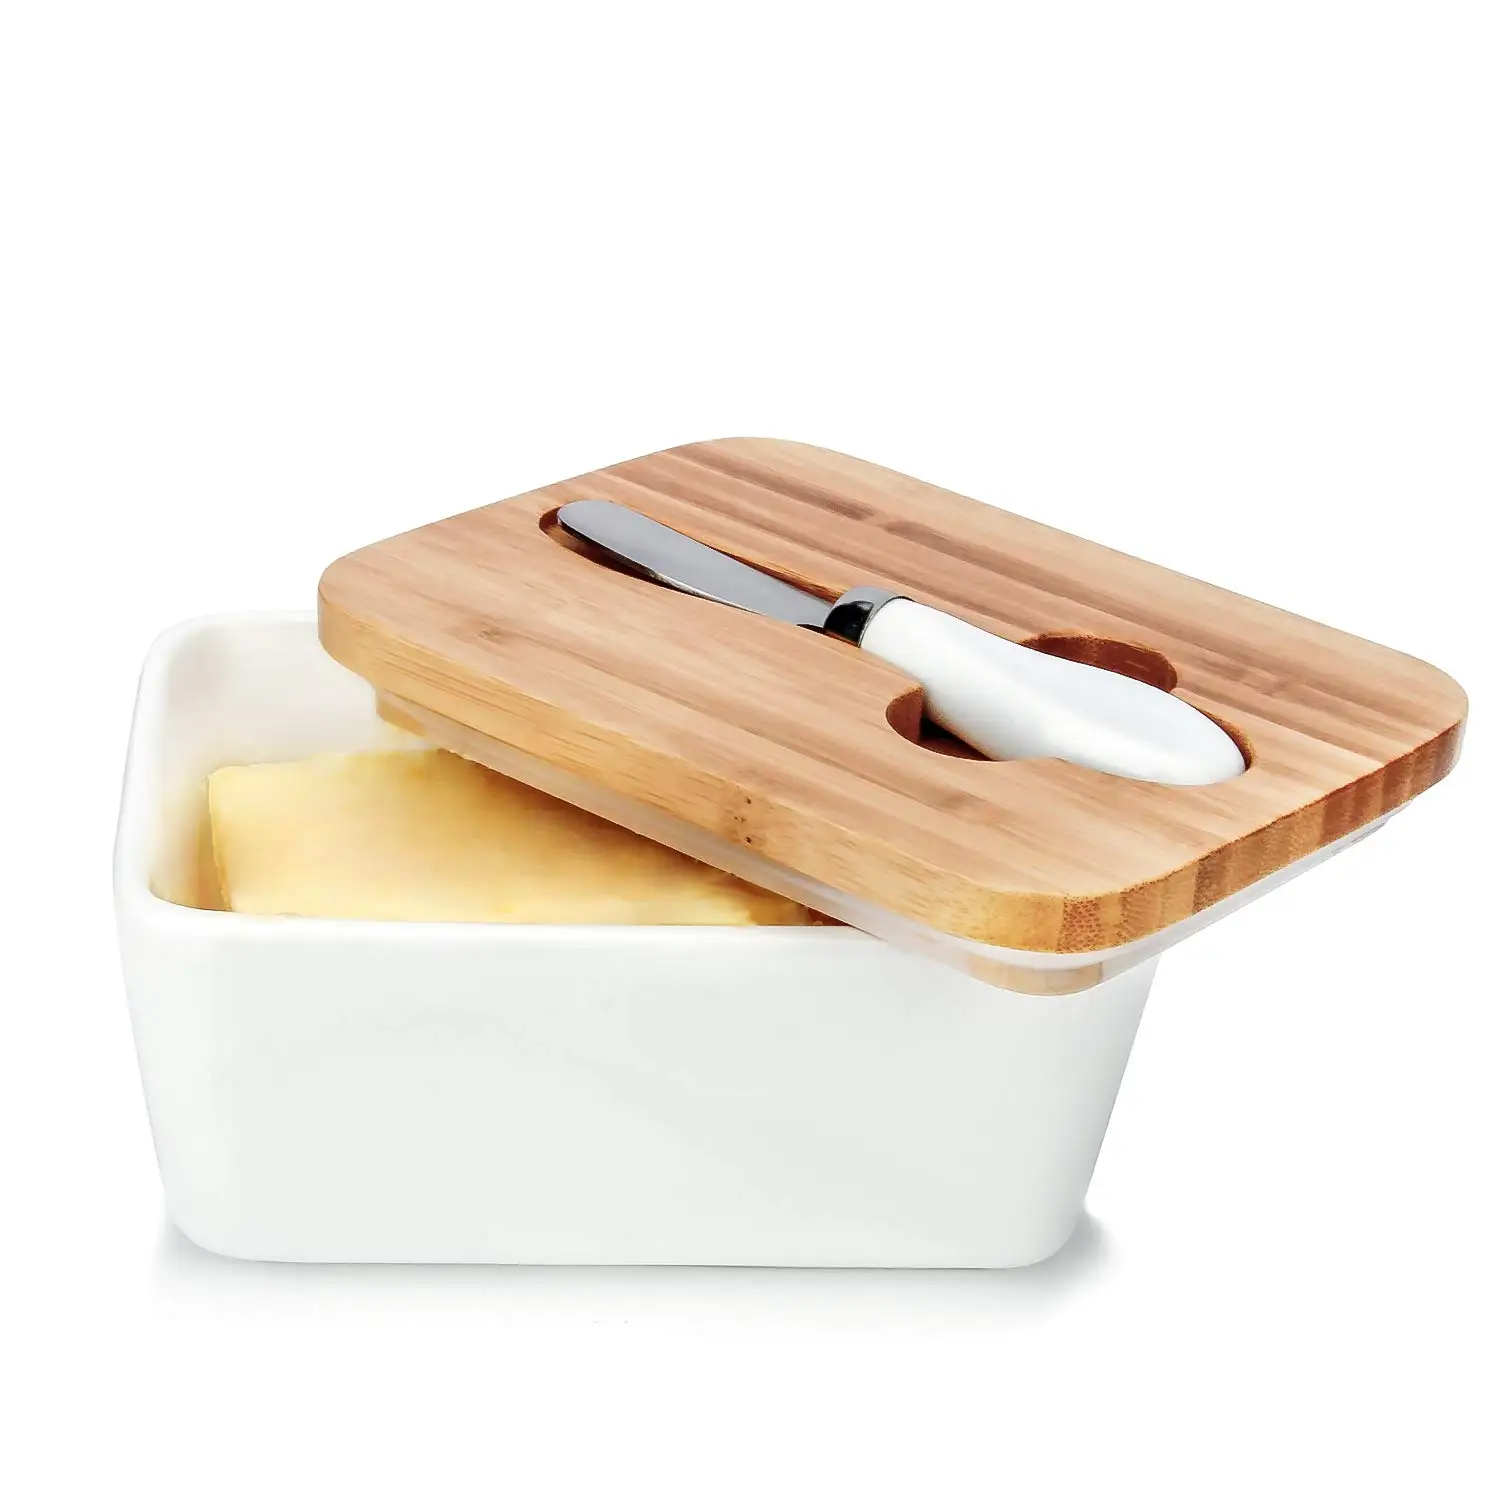 

Ceramic Butter Dish, Butter container with Wooden Lid and Knife, White Blue Rectangle Airtight Butter Keeper, White blue color